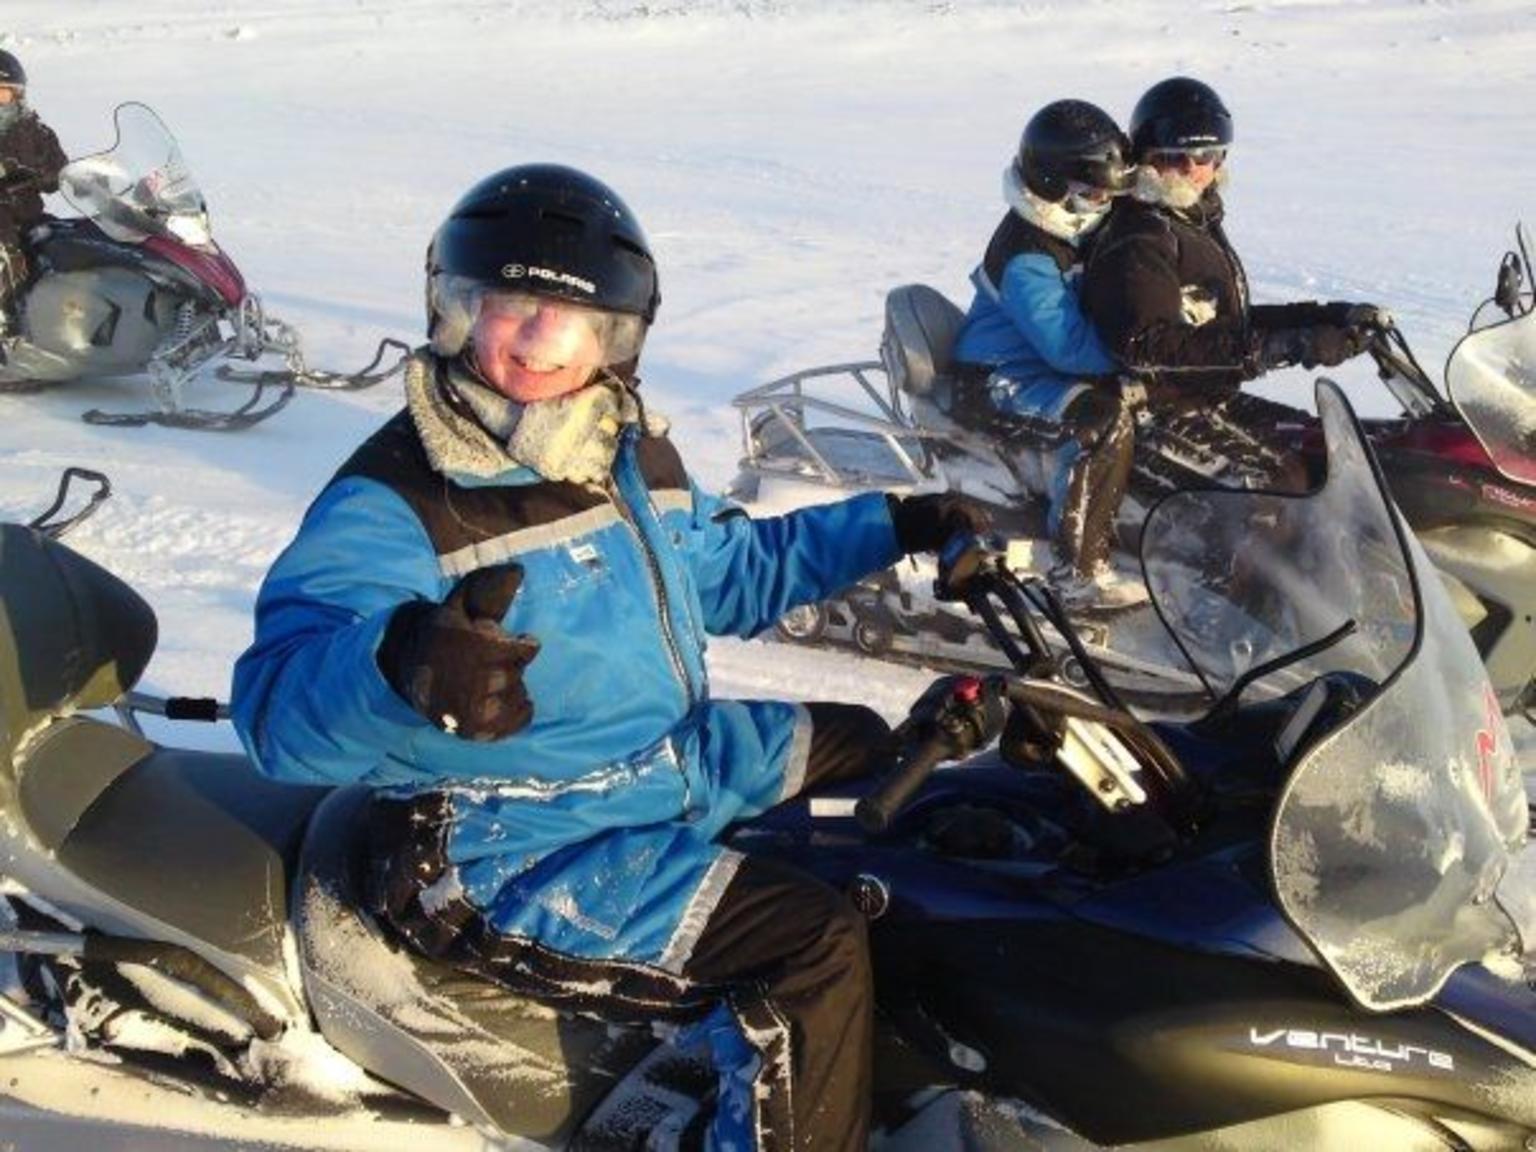 Iceland golden circle jeep tour snowmobiling photo 994418 1536tall